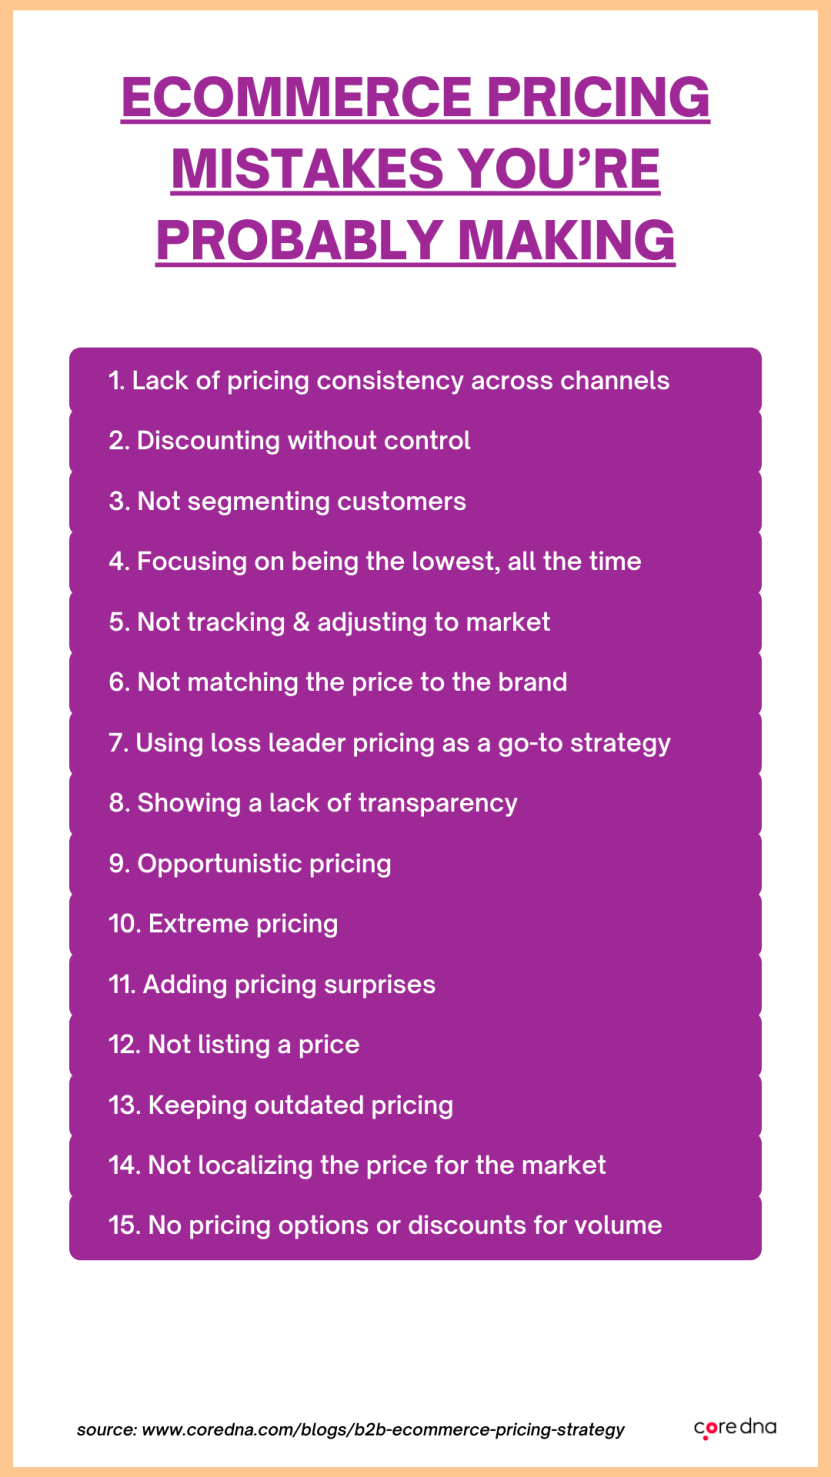 B2B eCommerce pricing mistakes